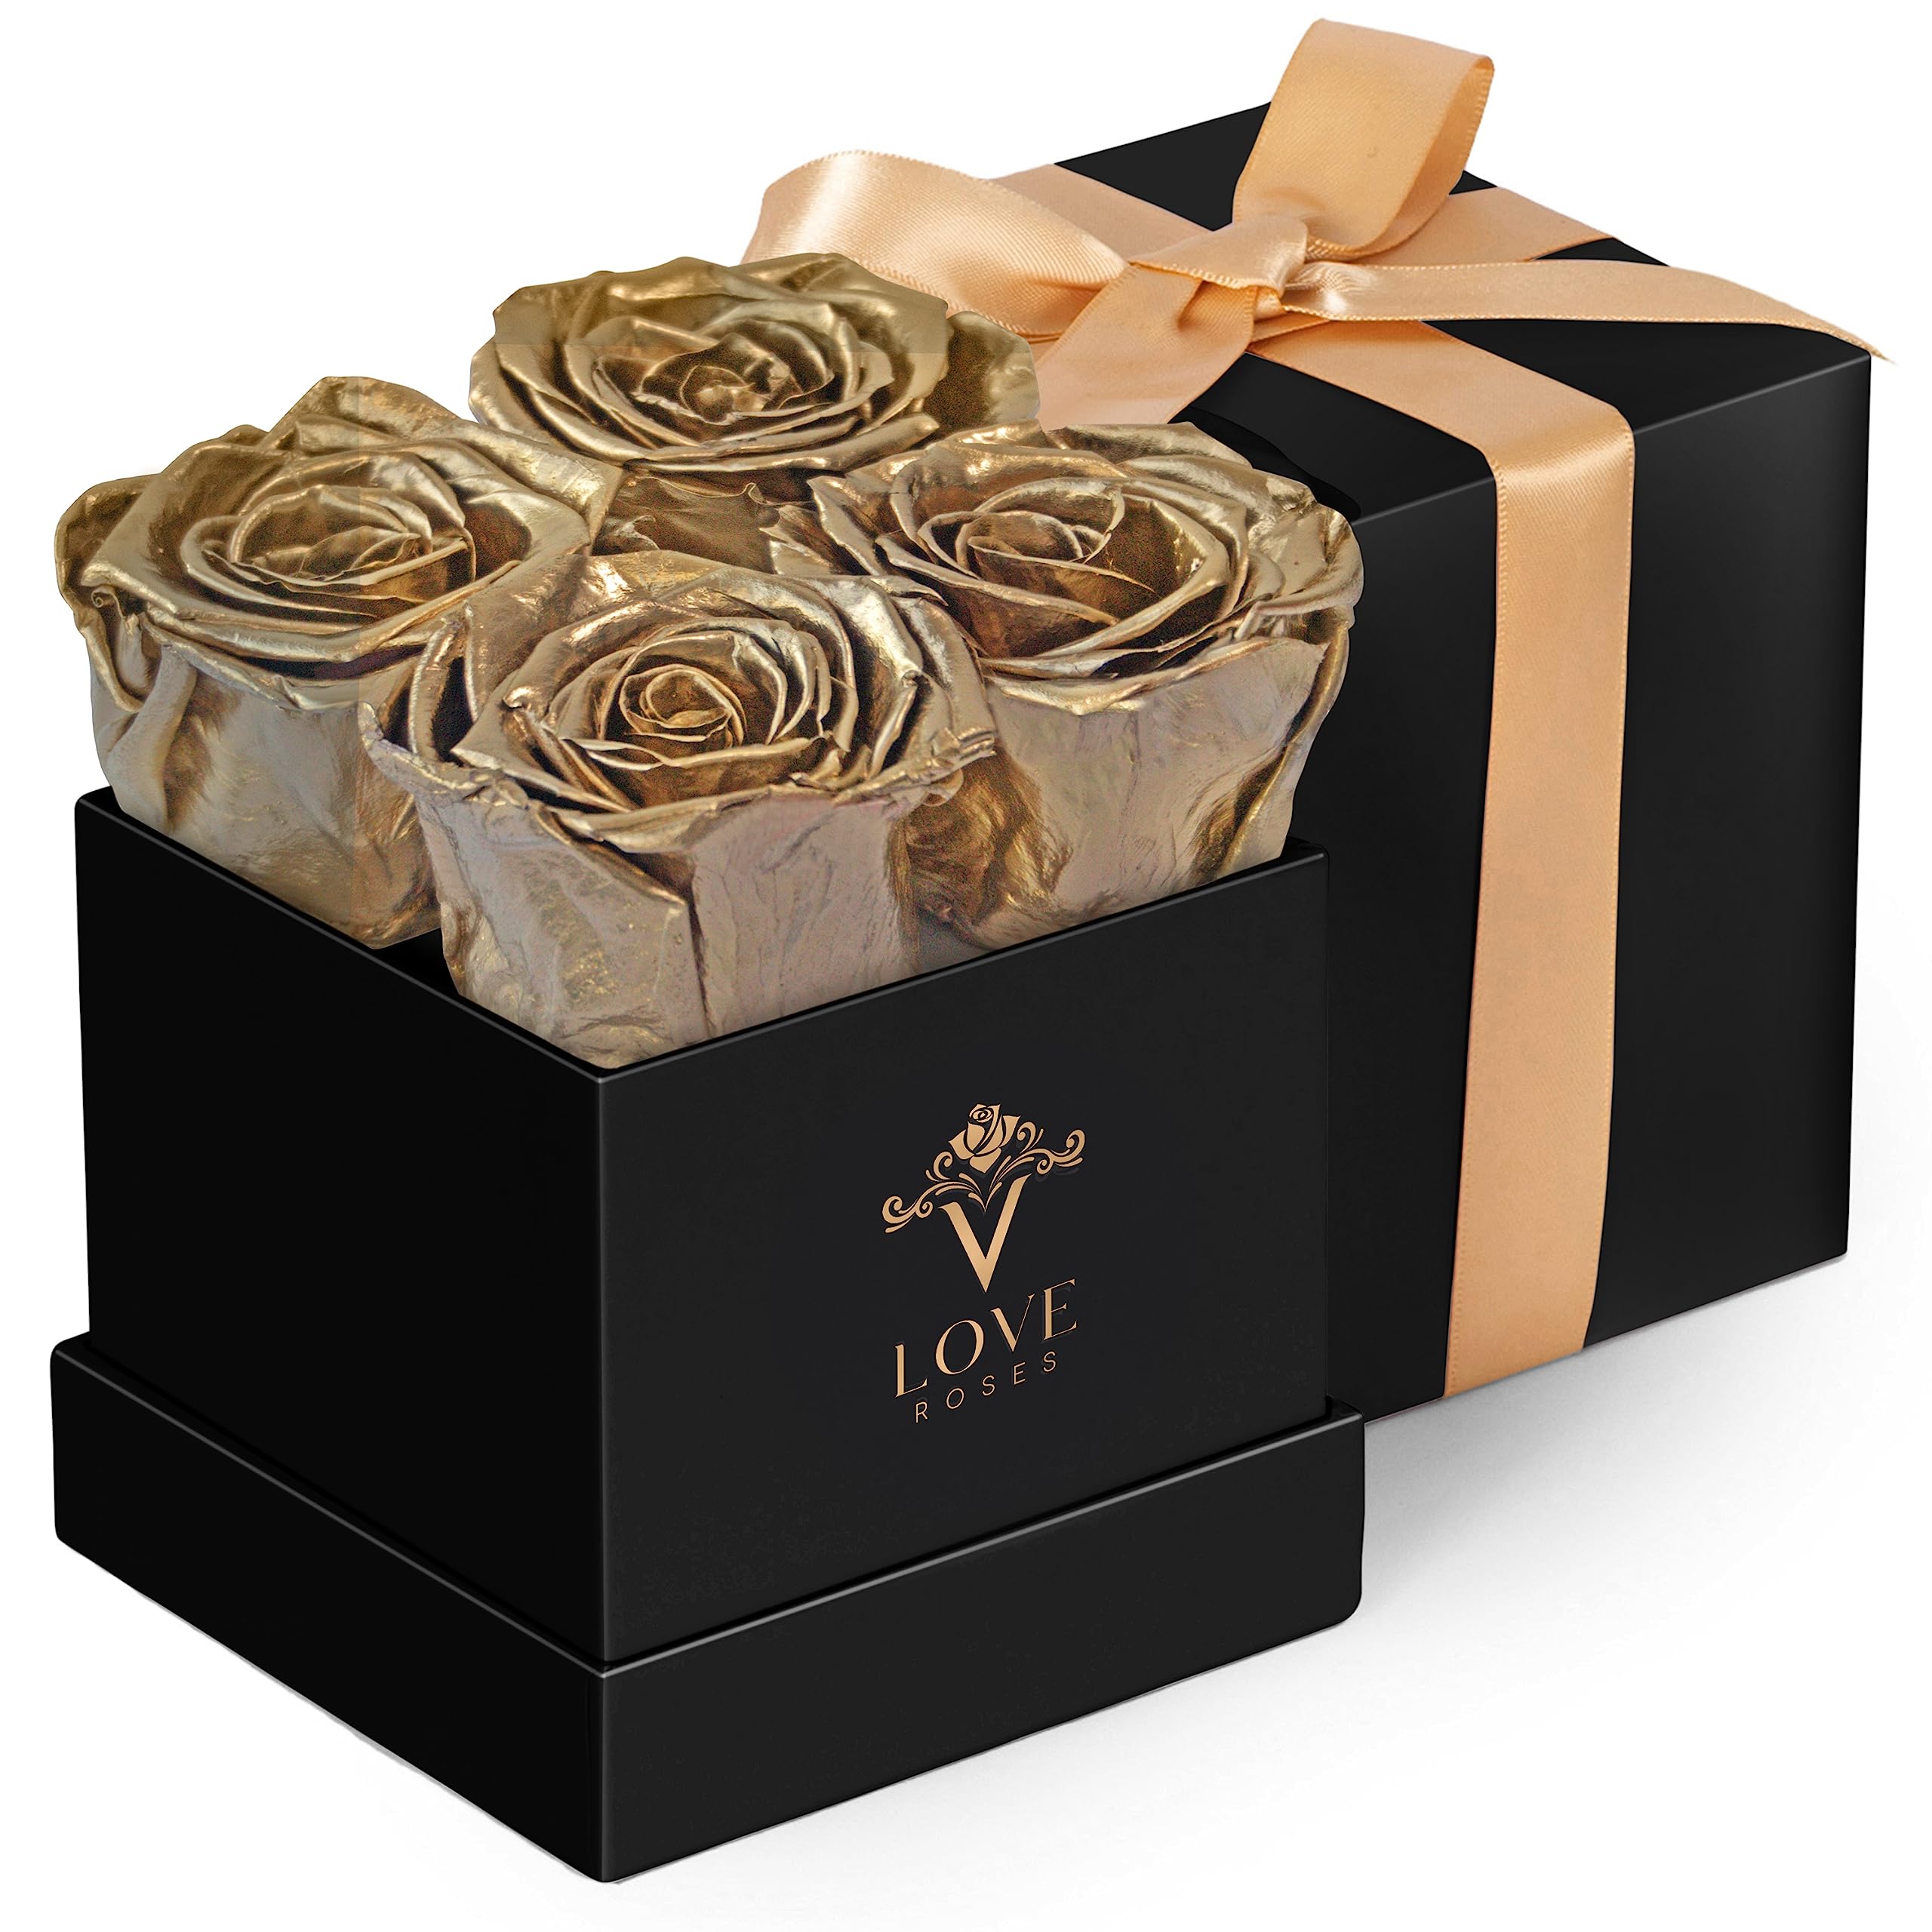 Gift Box Eternal Immortal Roses Flower Head Long Lasting Everlasting Rose Preserved Real Touch Roses In Square Bucket Box